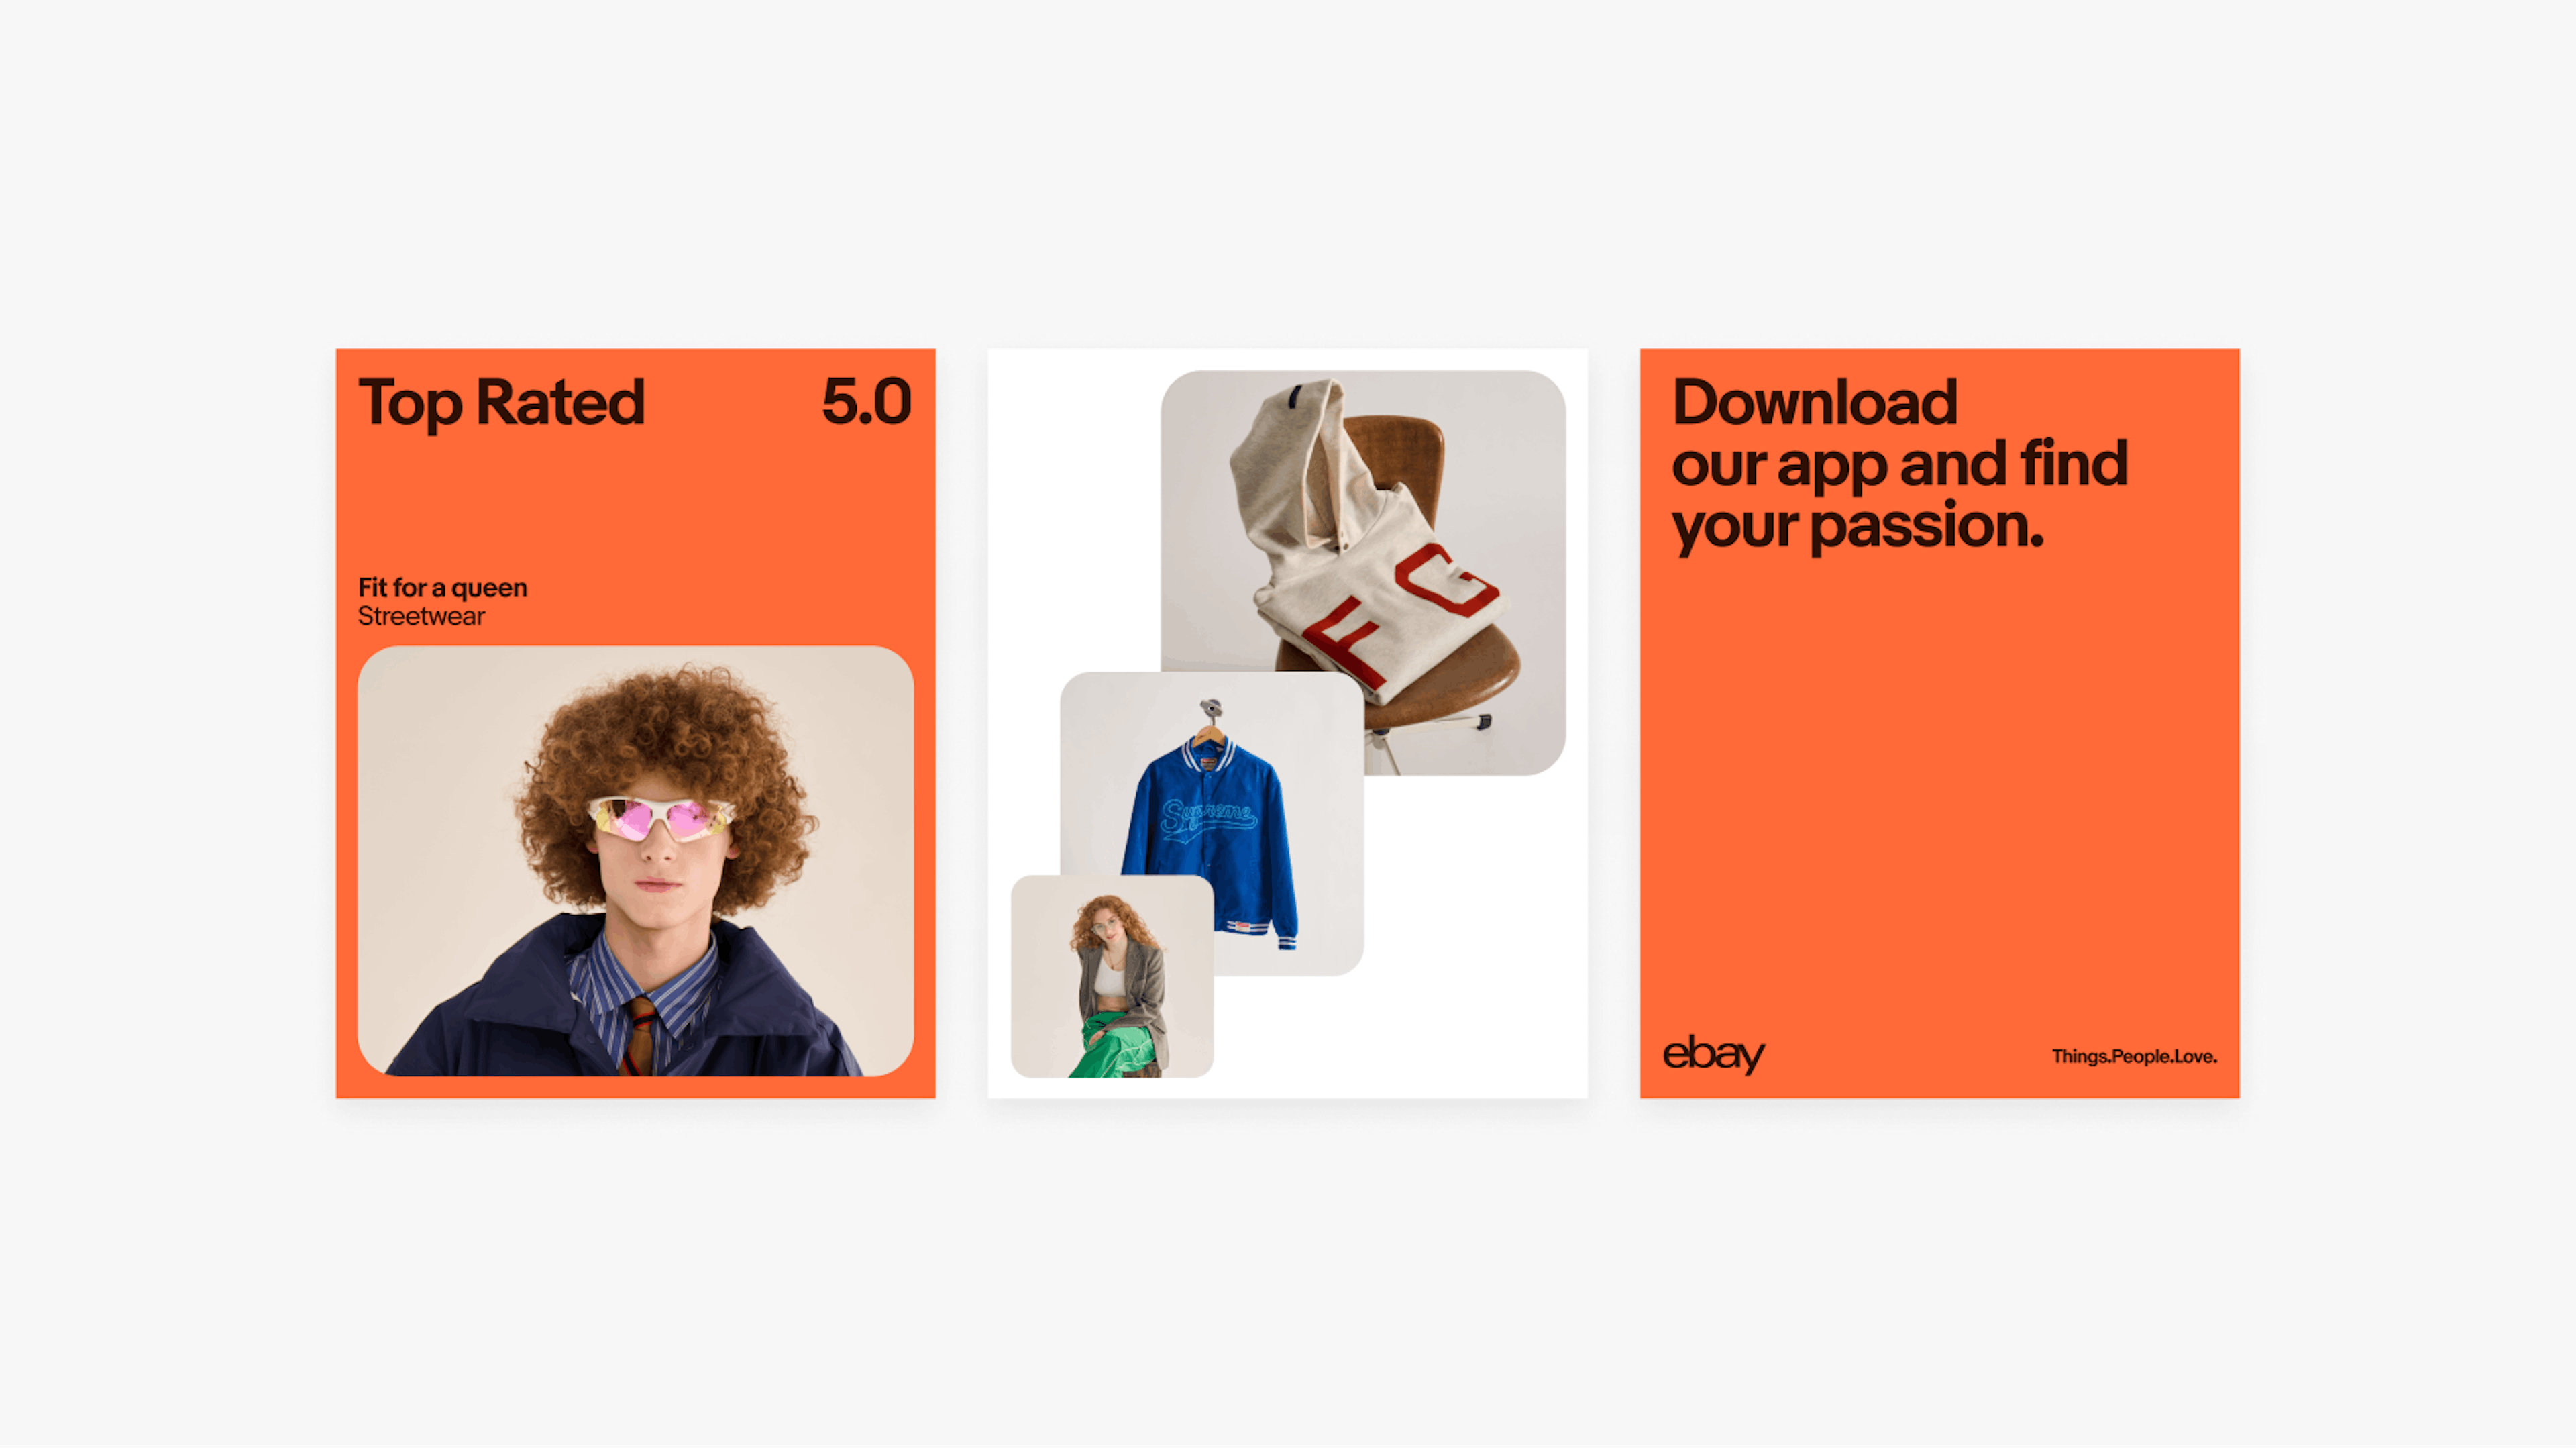 Three layouts in a row. The first layout has a vibrant orange background with dark brown text on top. Towards the top in large text is “Top Rated 5.0” followed by smaller text “Fit for a queen Streetwear”. A orange-haired man is wearing vibrant sunglasses towards the bottom. The second layout is a sample image stack moving from bottom left to upper right. The third layout has a vibrant orange background with “Download our app and find your passion” in the top. The eBay logo and “Things.People.Love.” is toward the bottom all in dark brown.